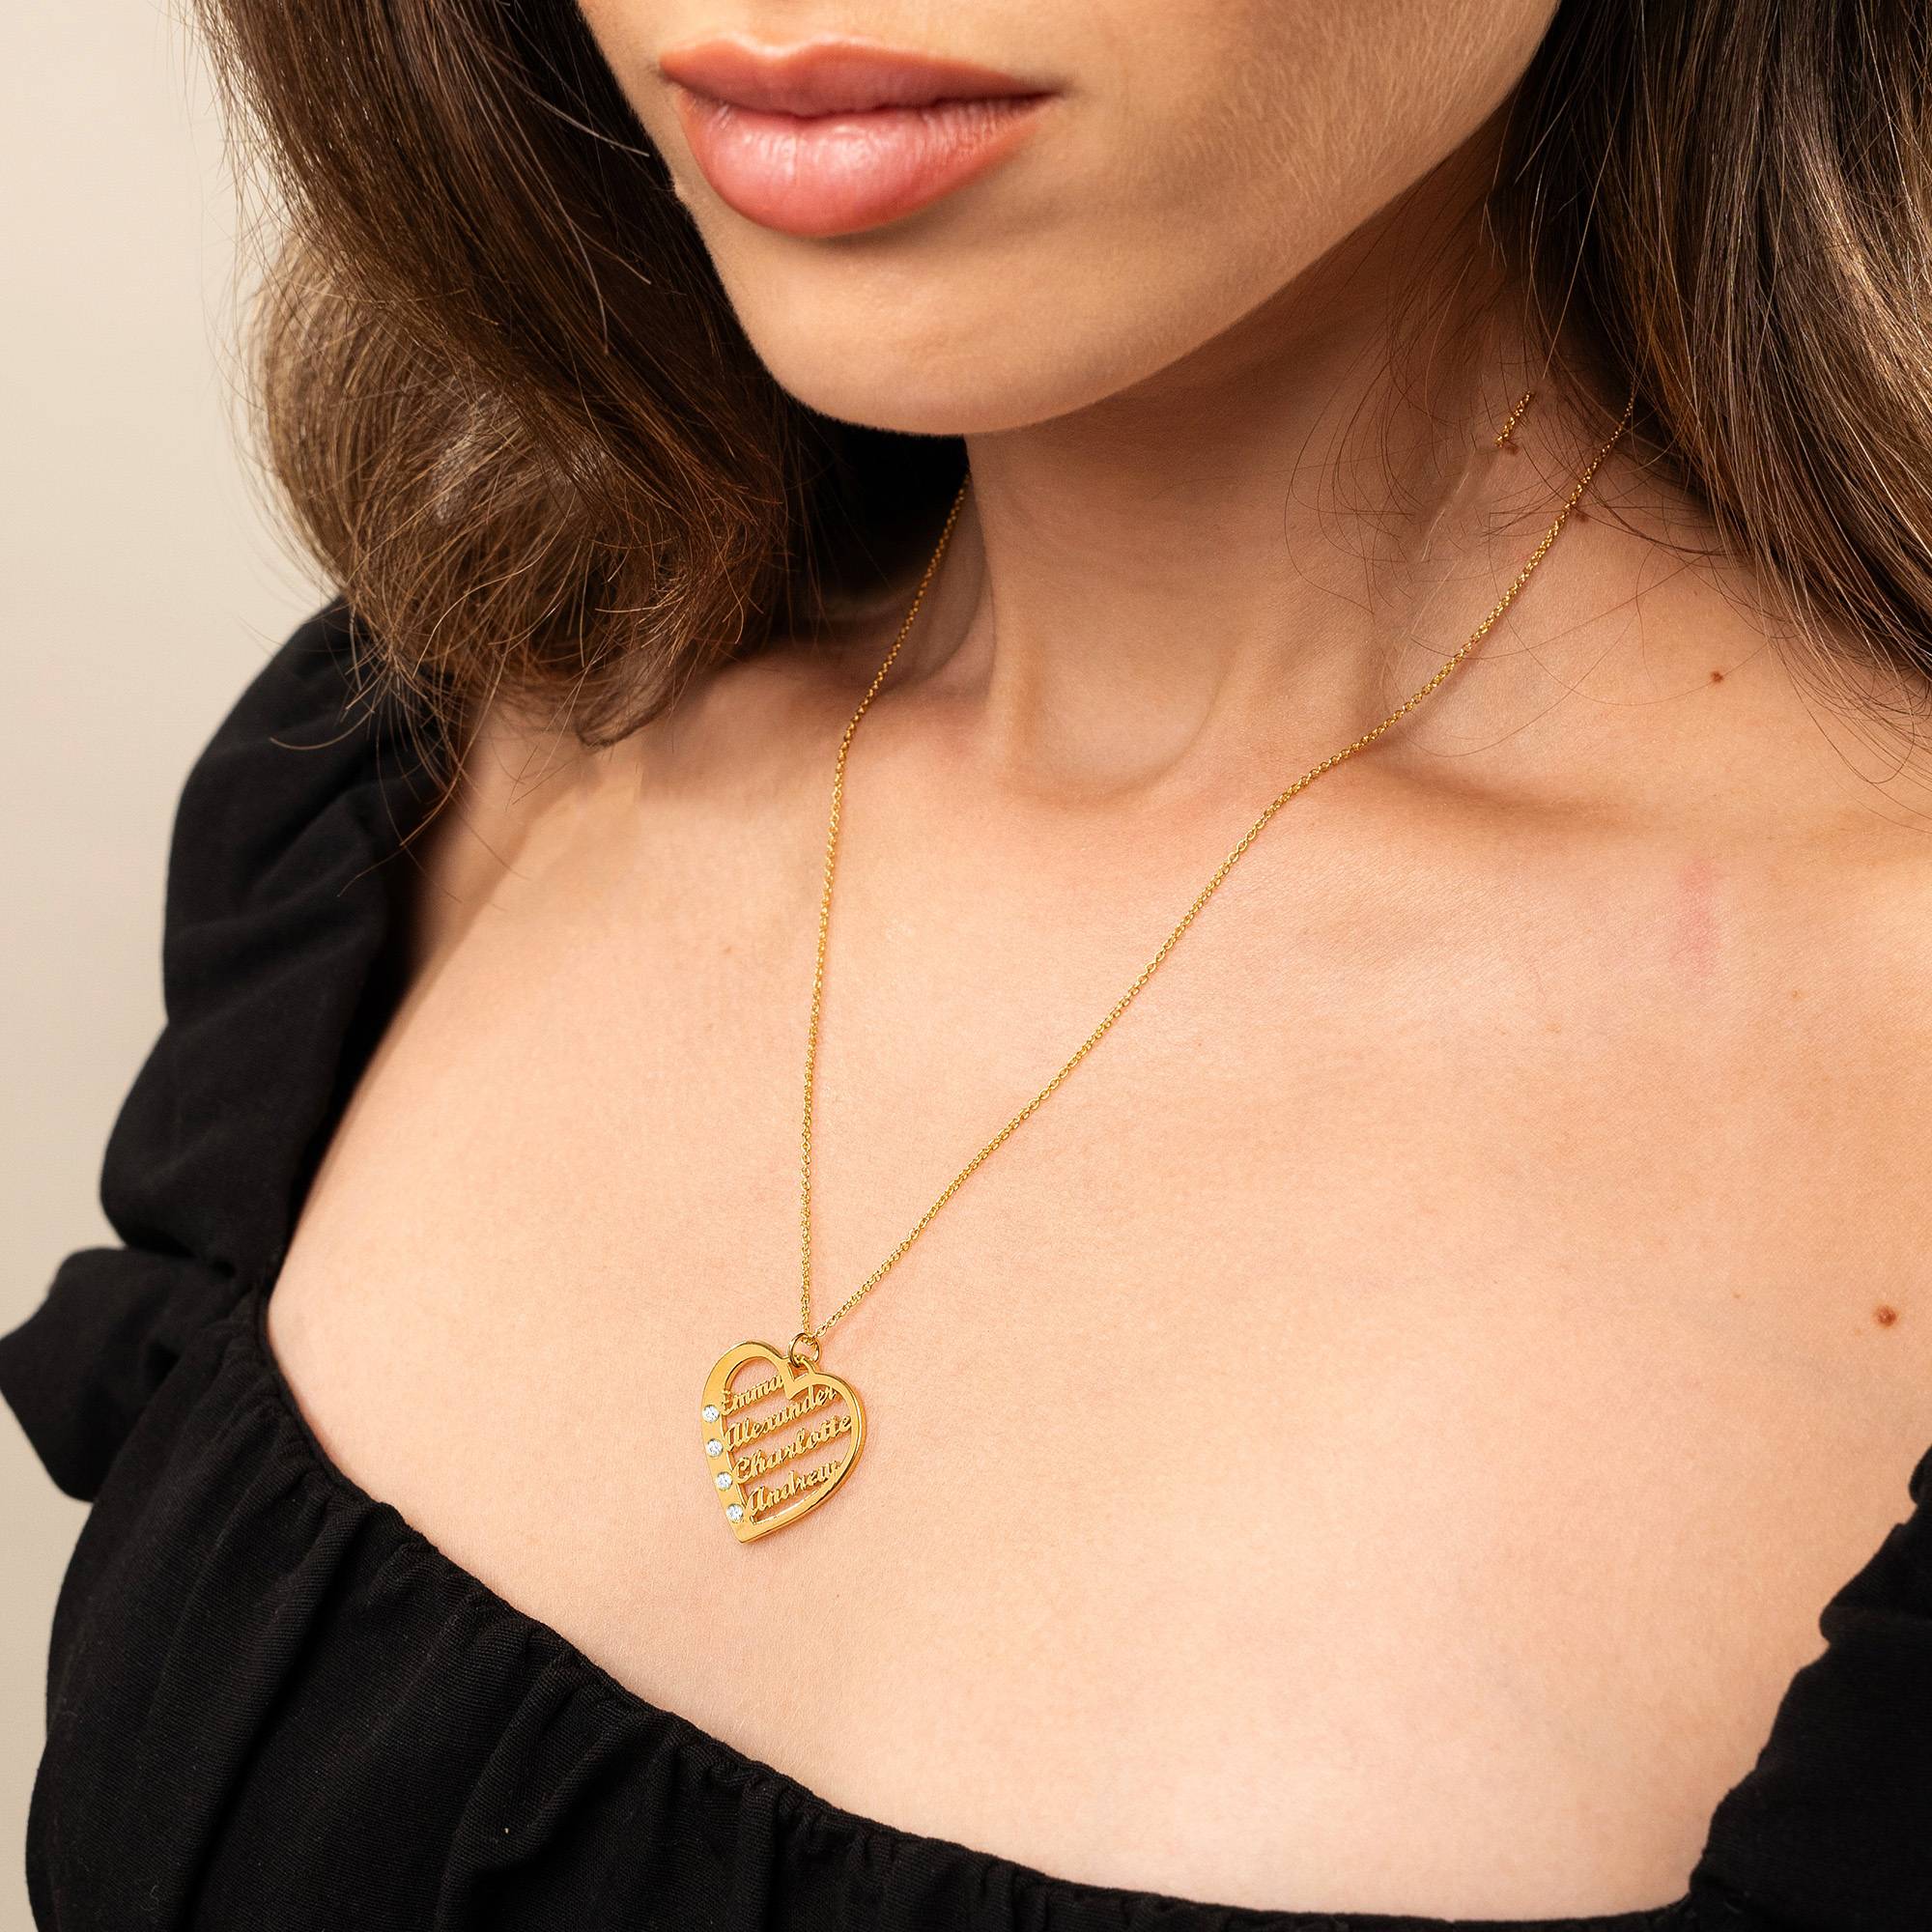 Ella Diamond Heart Necklace with Names in 18K Gold Vermeil-6 product photo